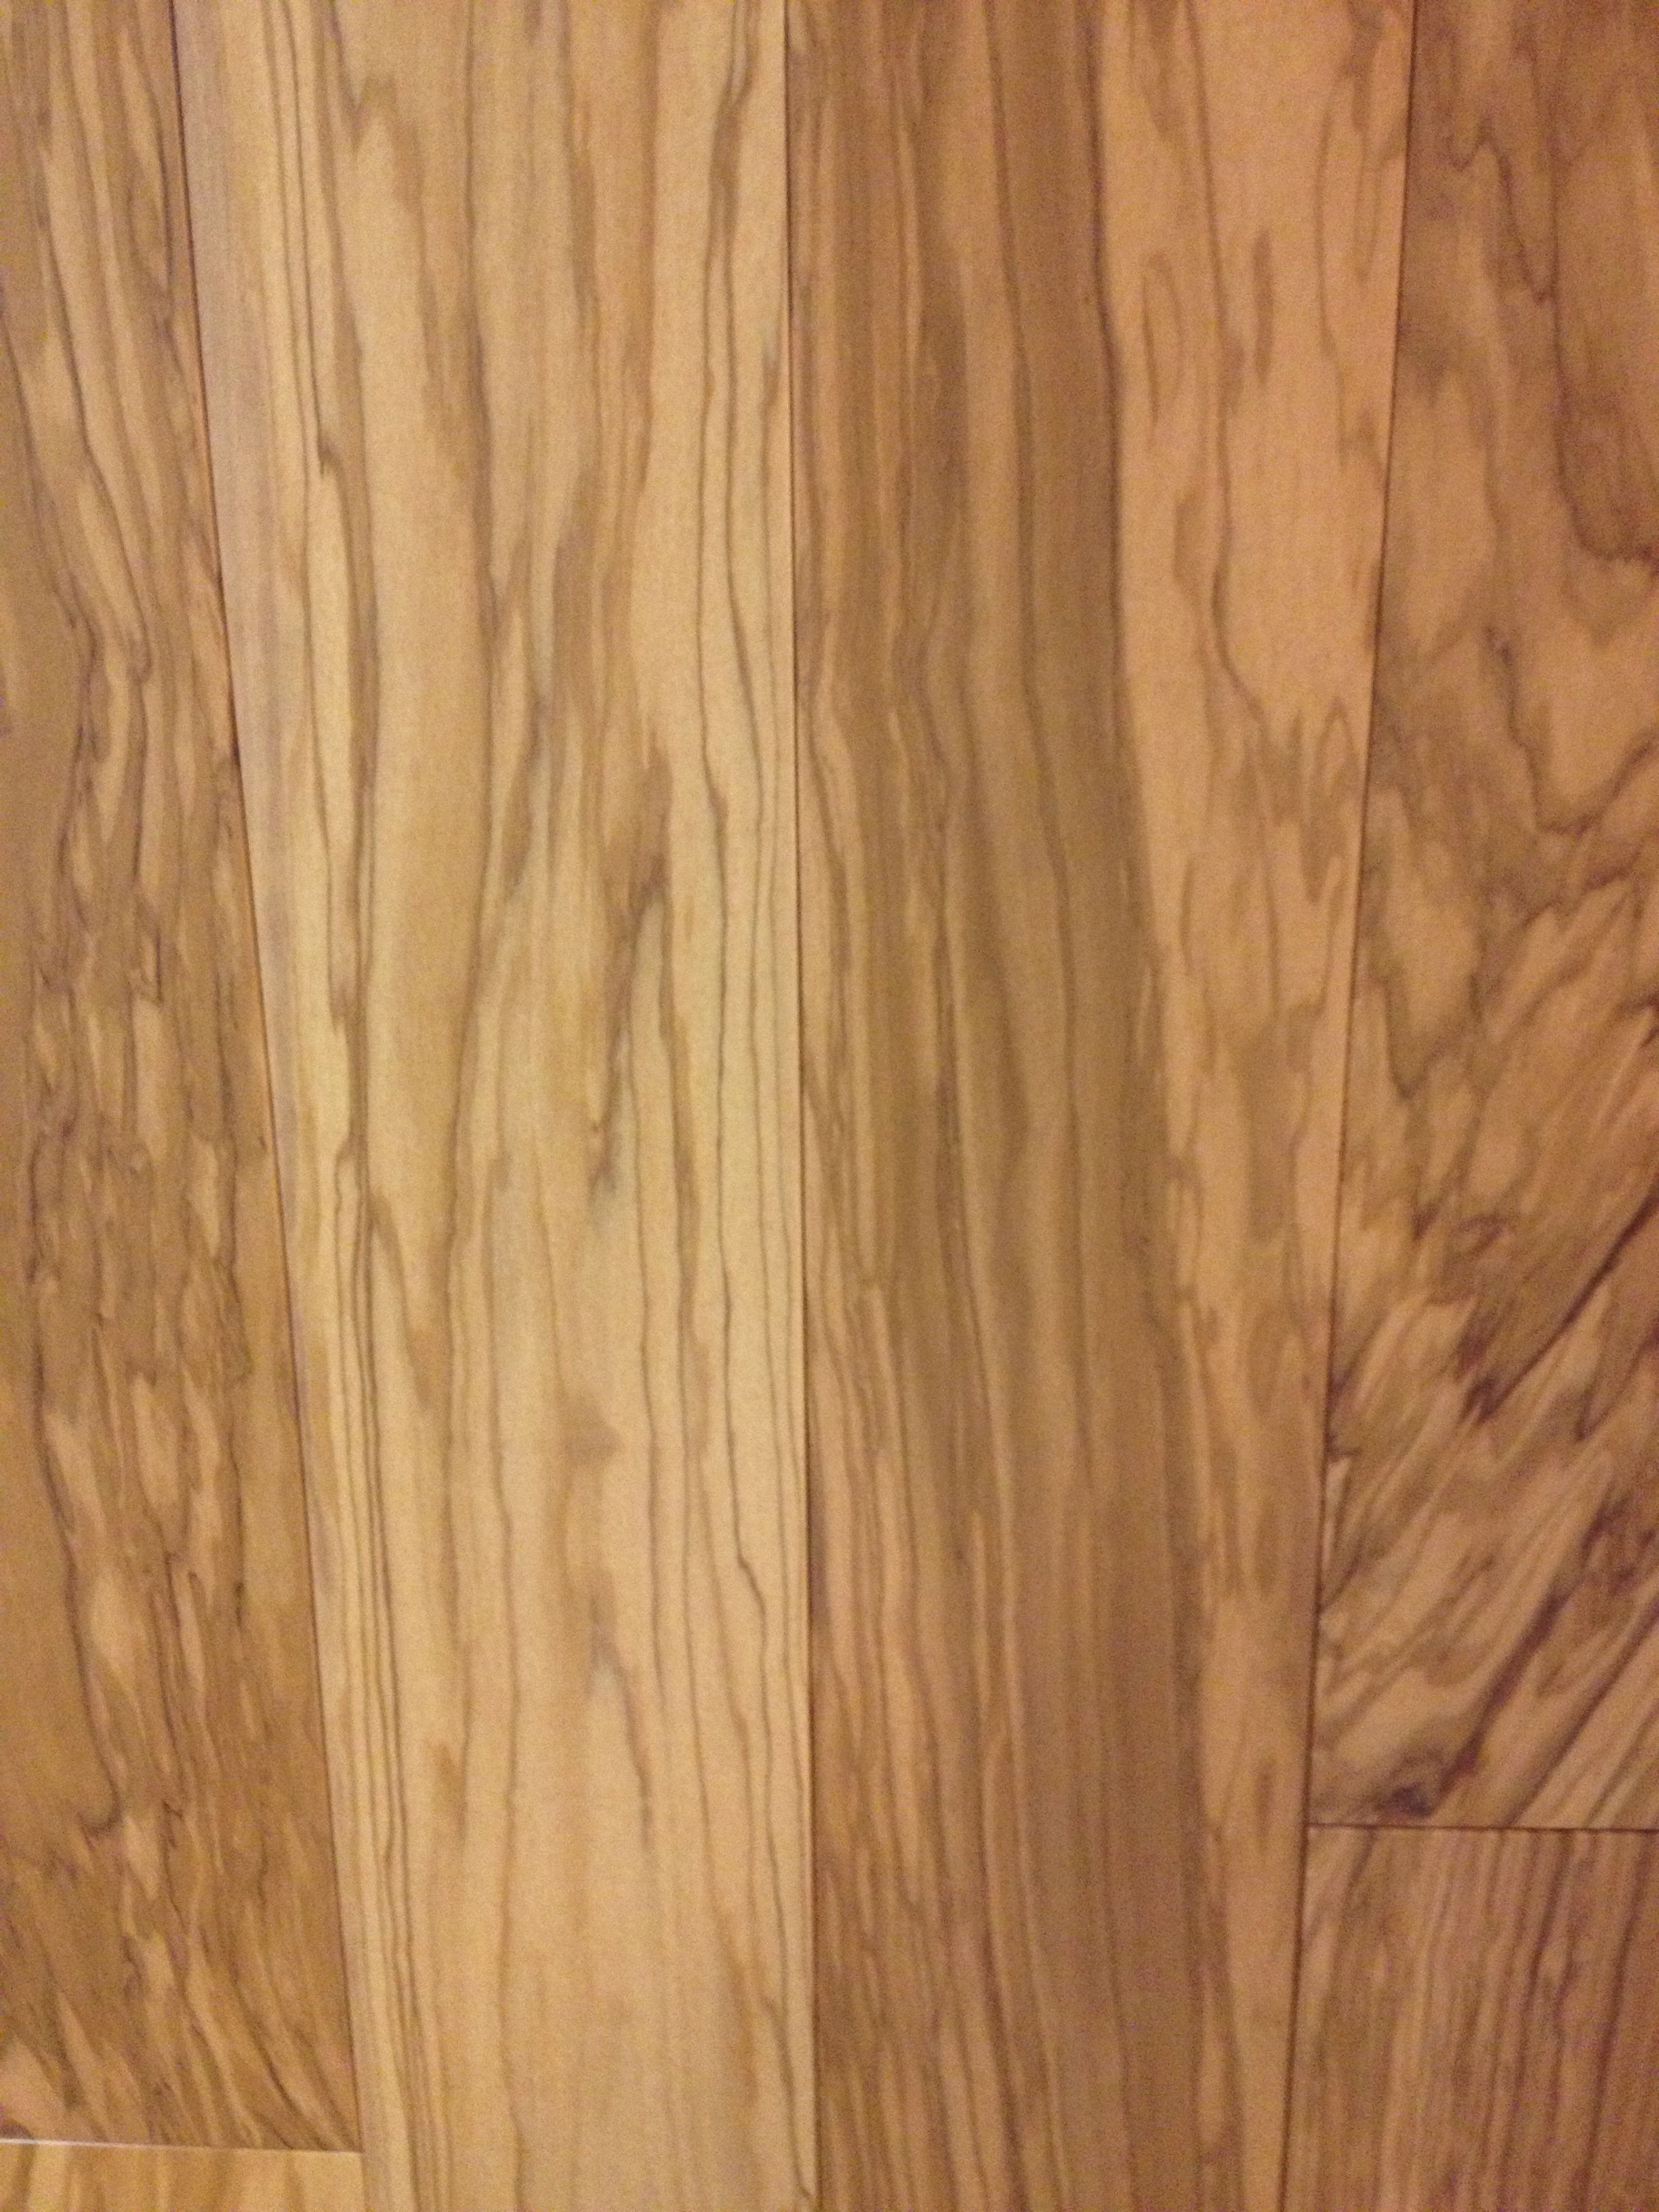 30 attractive Hardwood Floor Refinishing Portland Cost 2024 free download hardwood floor refinishing portland cost of tuscany olive wood floor there is nothing quite like olive wood for throughout tuscany olive wood floor there is nothing quite like olive wood for